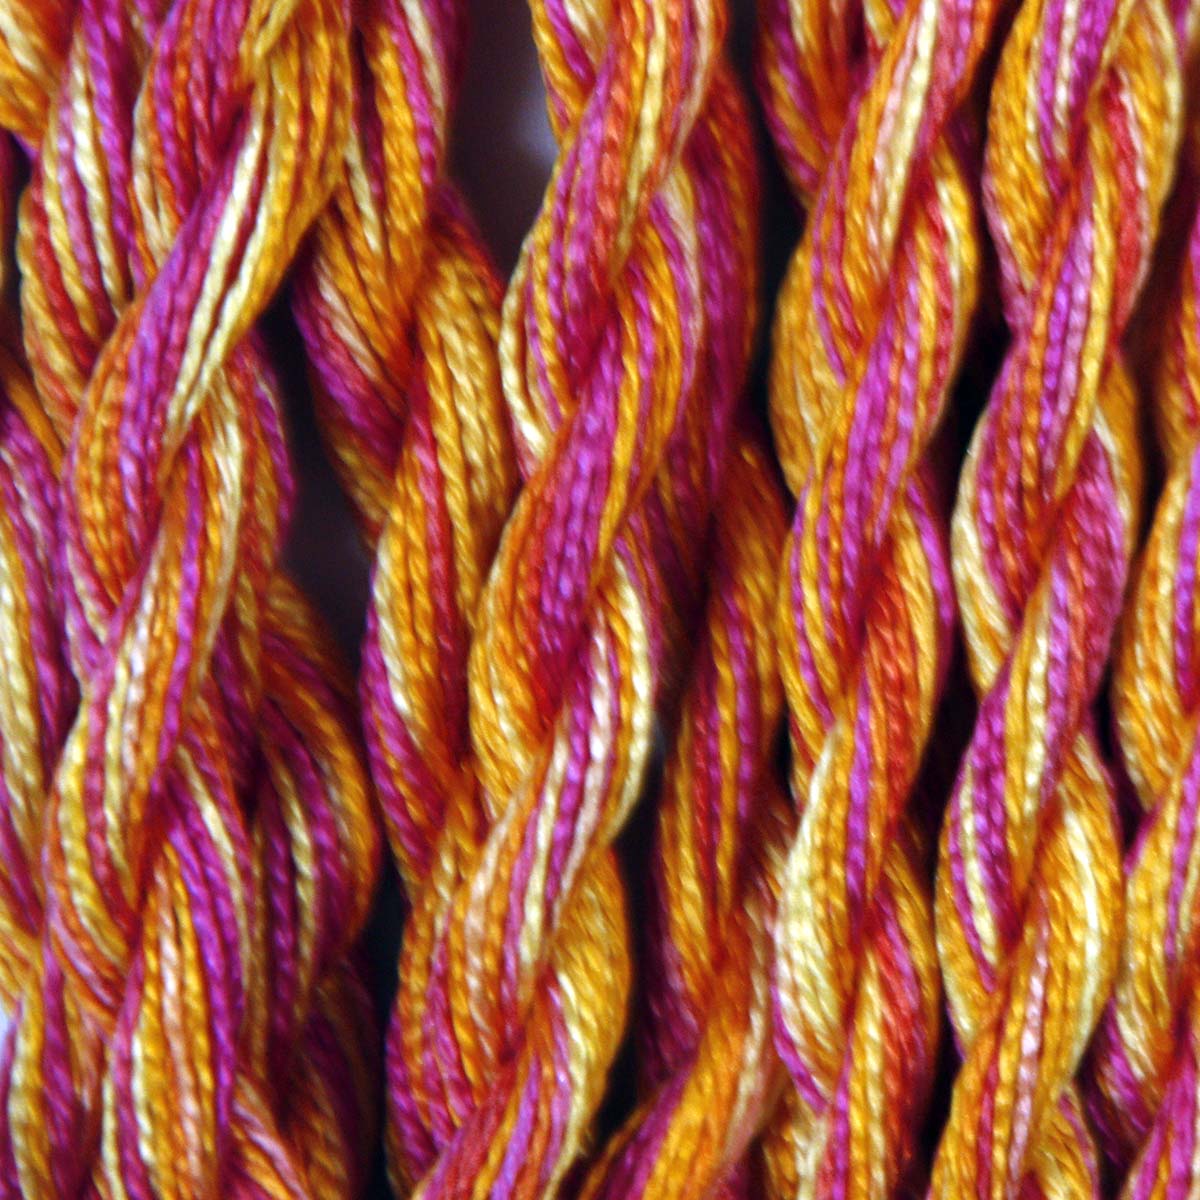 www.colourstreams.com.au Colour Streams Hand Dyed Silk Threads Silken Strands Ophir Exotic Lights Aurora Slow Stitch Embroidery Textile Arts Fibre DL 68 Tequila Sunrise Oranges Yellows Pinks